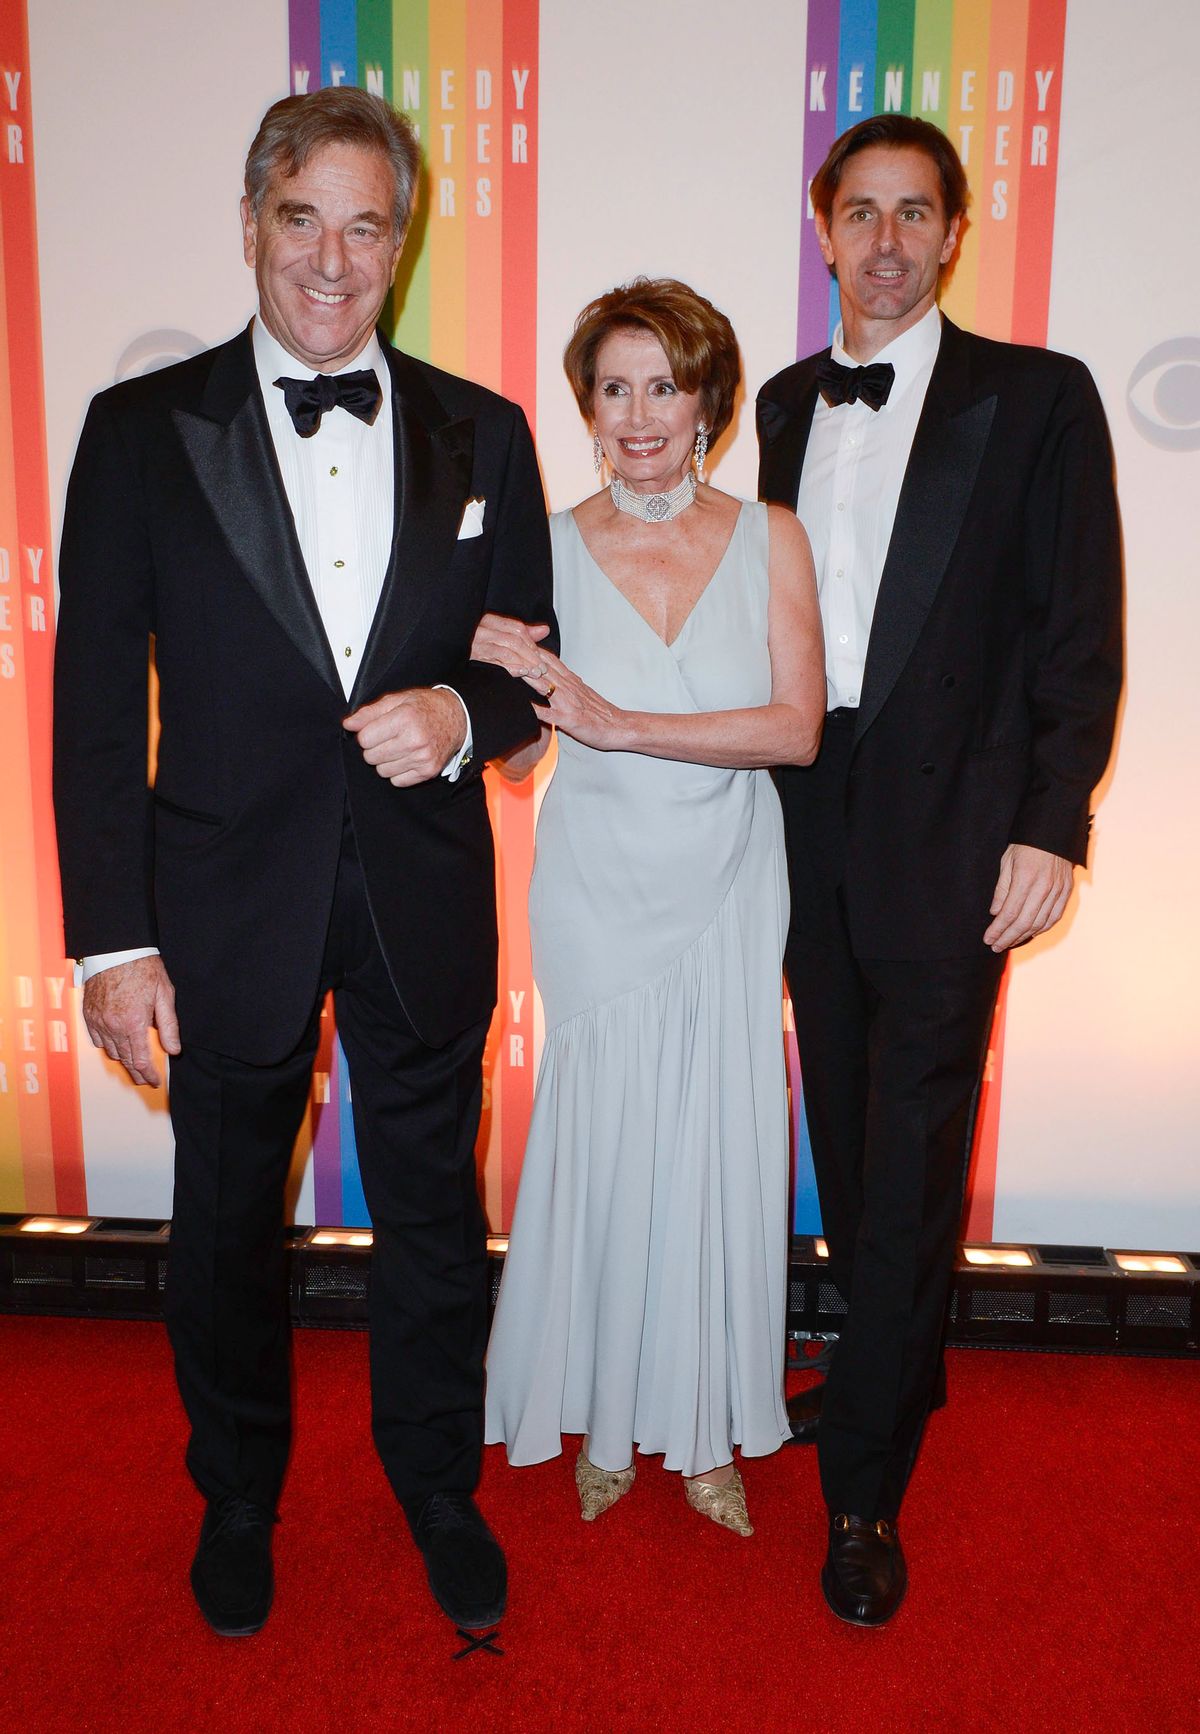 WASHINGTON, DC - DECEMBER 02: Paul Pelosi, Nancy Pelosi and Paul Pelosi Jr attend the 35th Kennedy Center Honors at the Kennedy Center Hall of States on December 2, 2012 in Washington, DC. (Photo by Riccardo S. Savi/WireImage) (Riccardo S. Savi/WireImage)